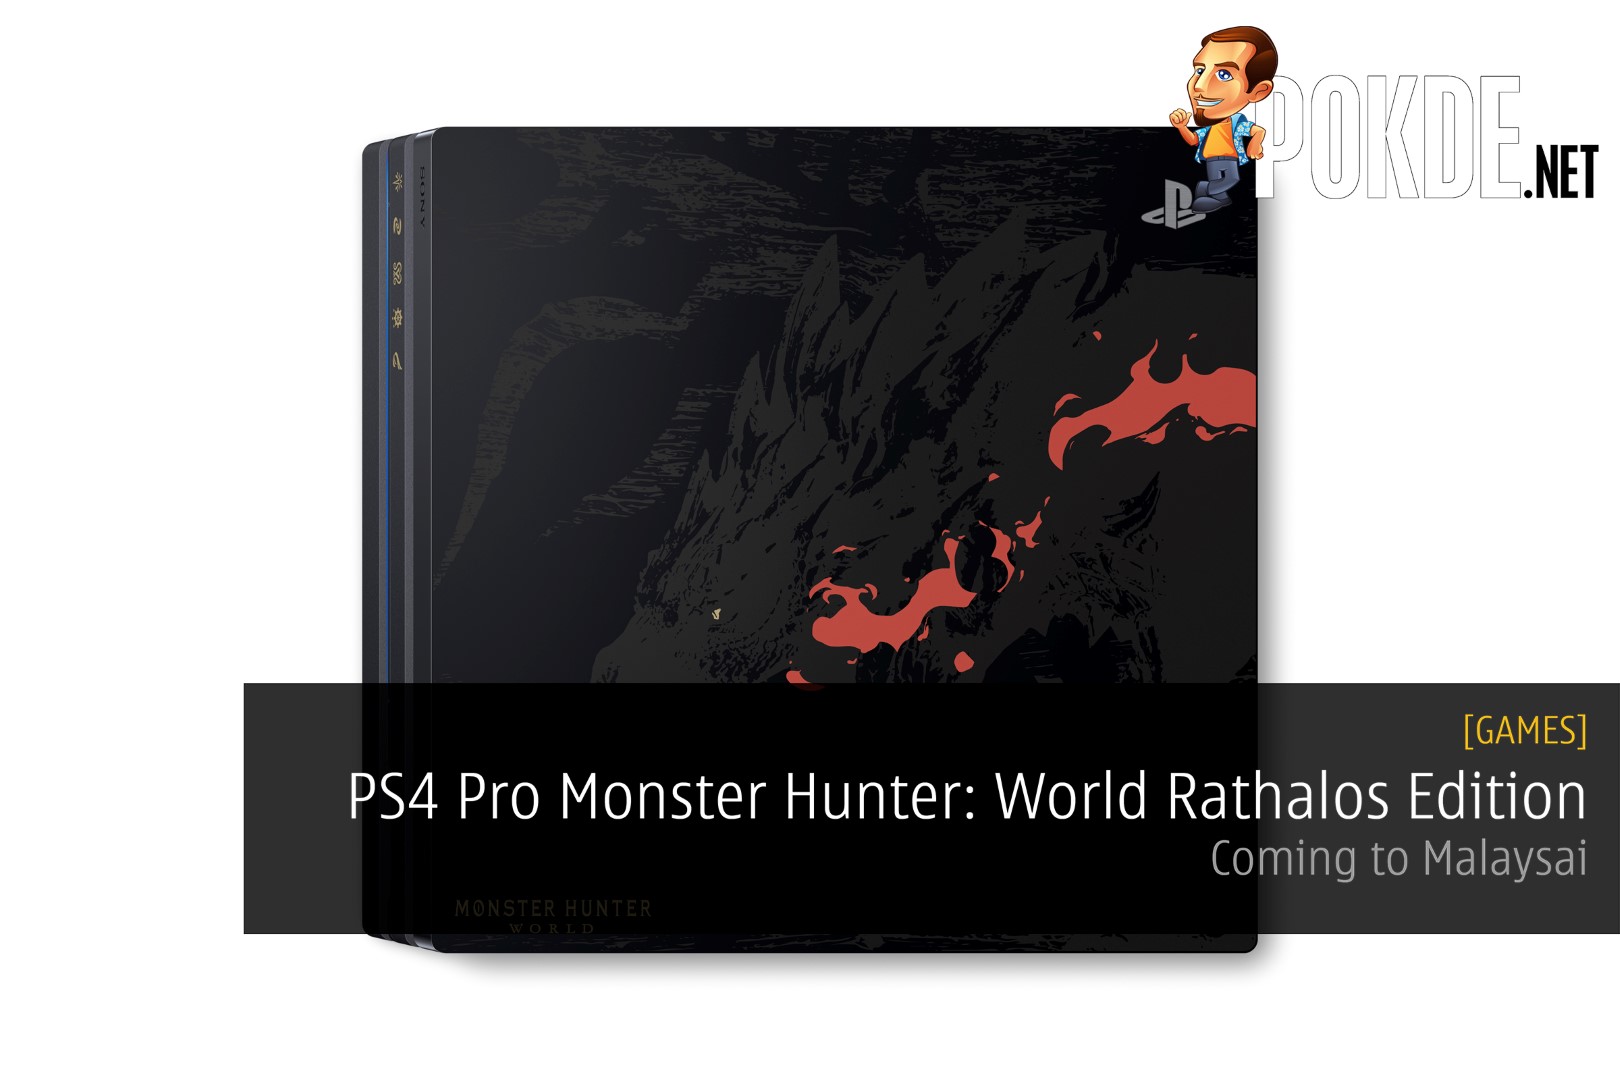 PS4 Pro Monster Hunter: World Rathalos Edition Is Coming To Malaysia! 31